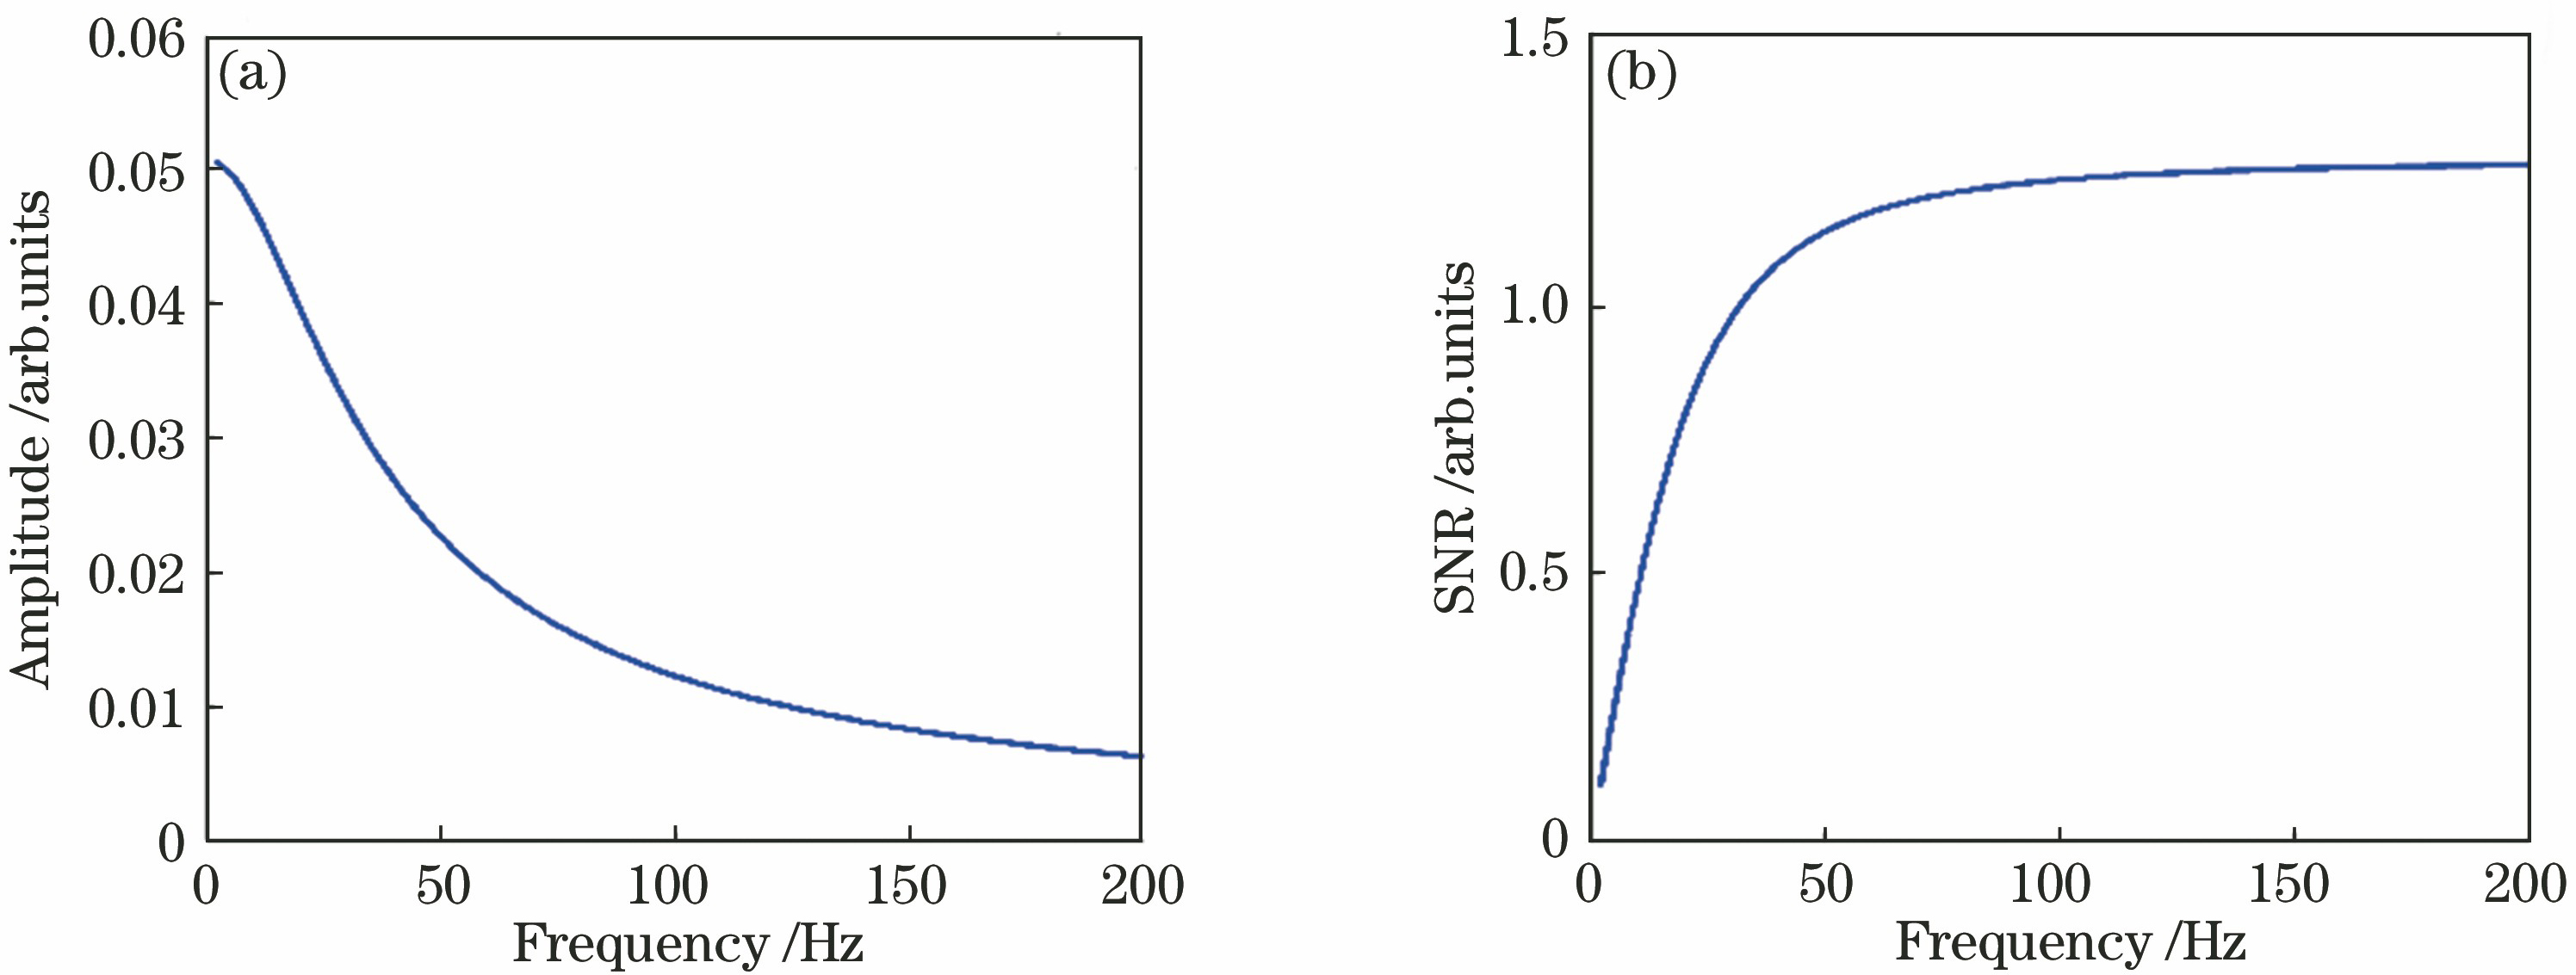 Simulaed curves. (a) Response between amplitude and frequency; (b) relation between SNR and frequency